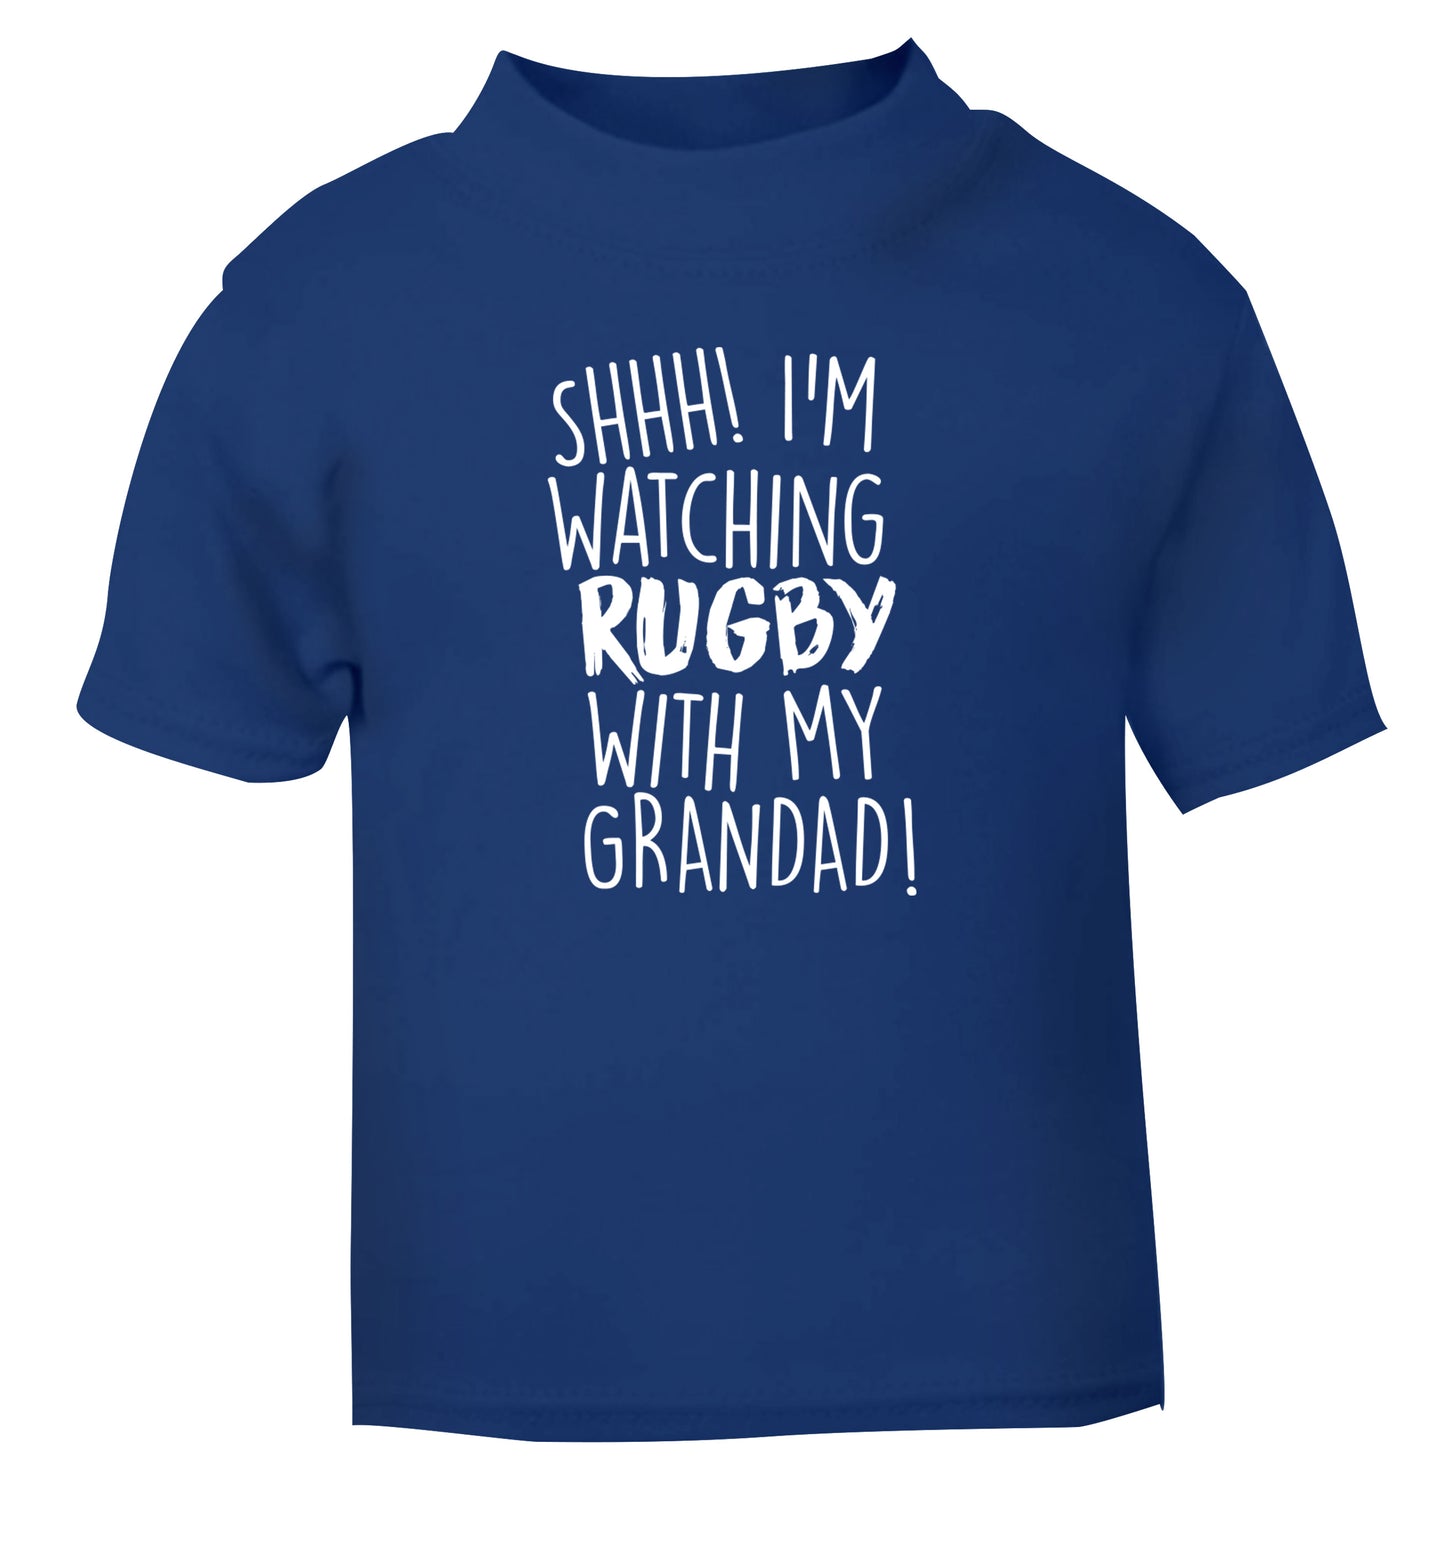 Shh I'm watching rugby with my grandad blue Baby Toddler Tshirt 2 Years